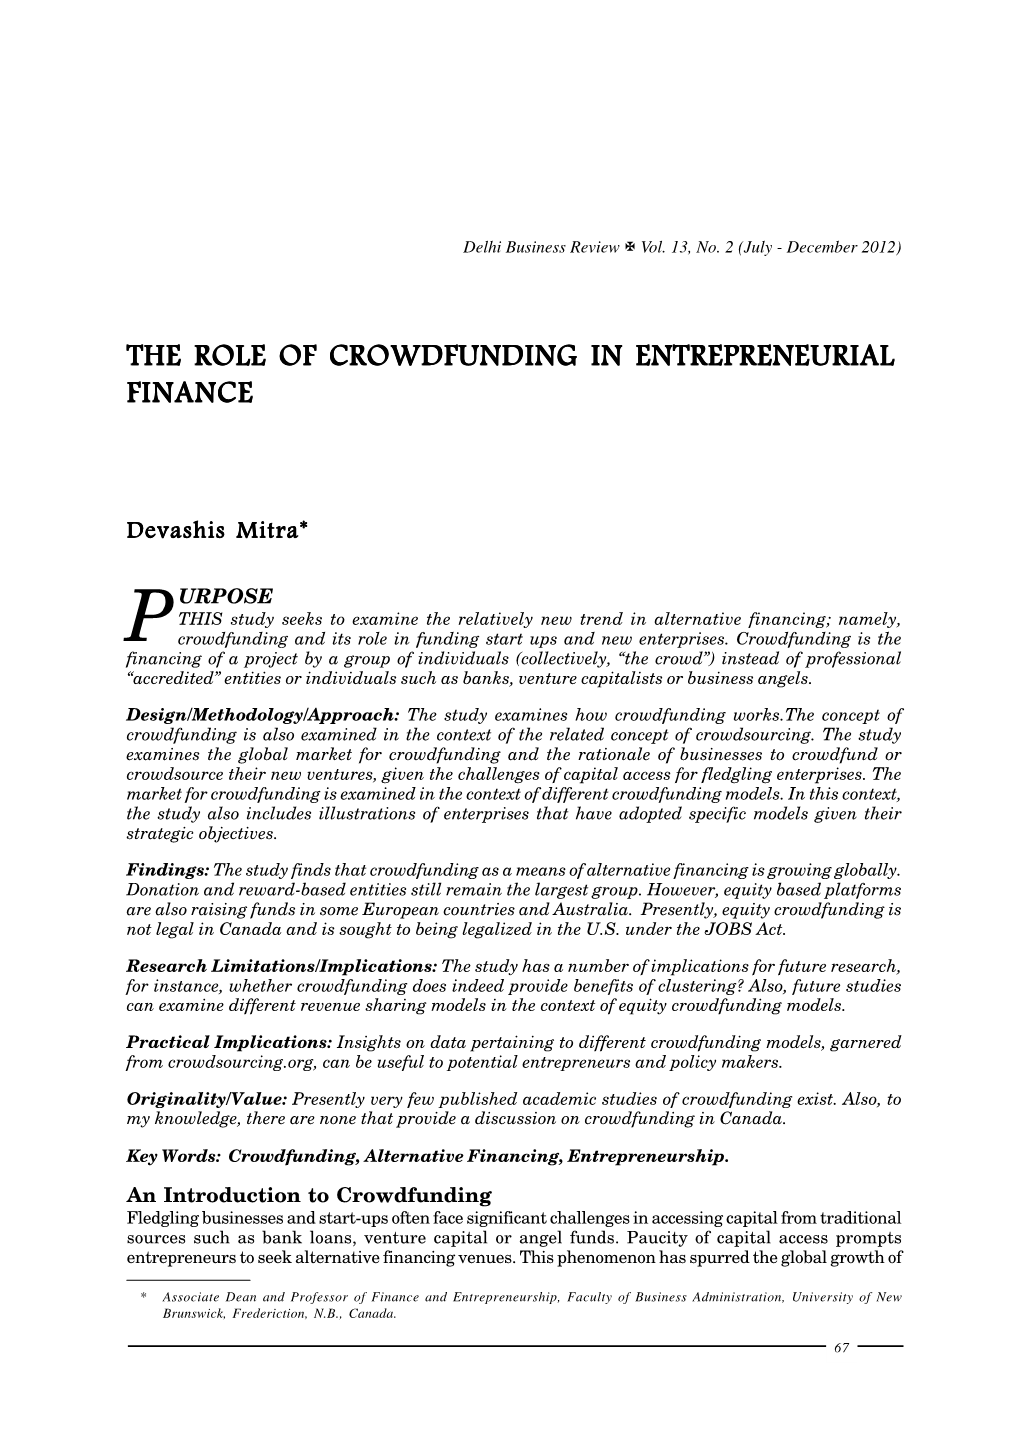 The Role of Crowdfunding in Entrepreneurial Finance